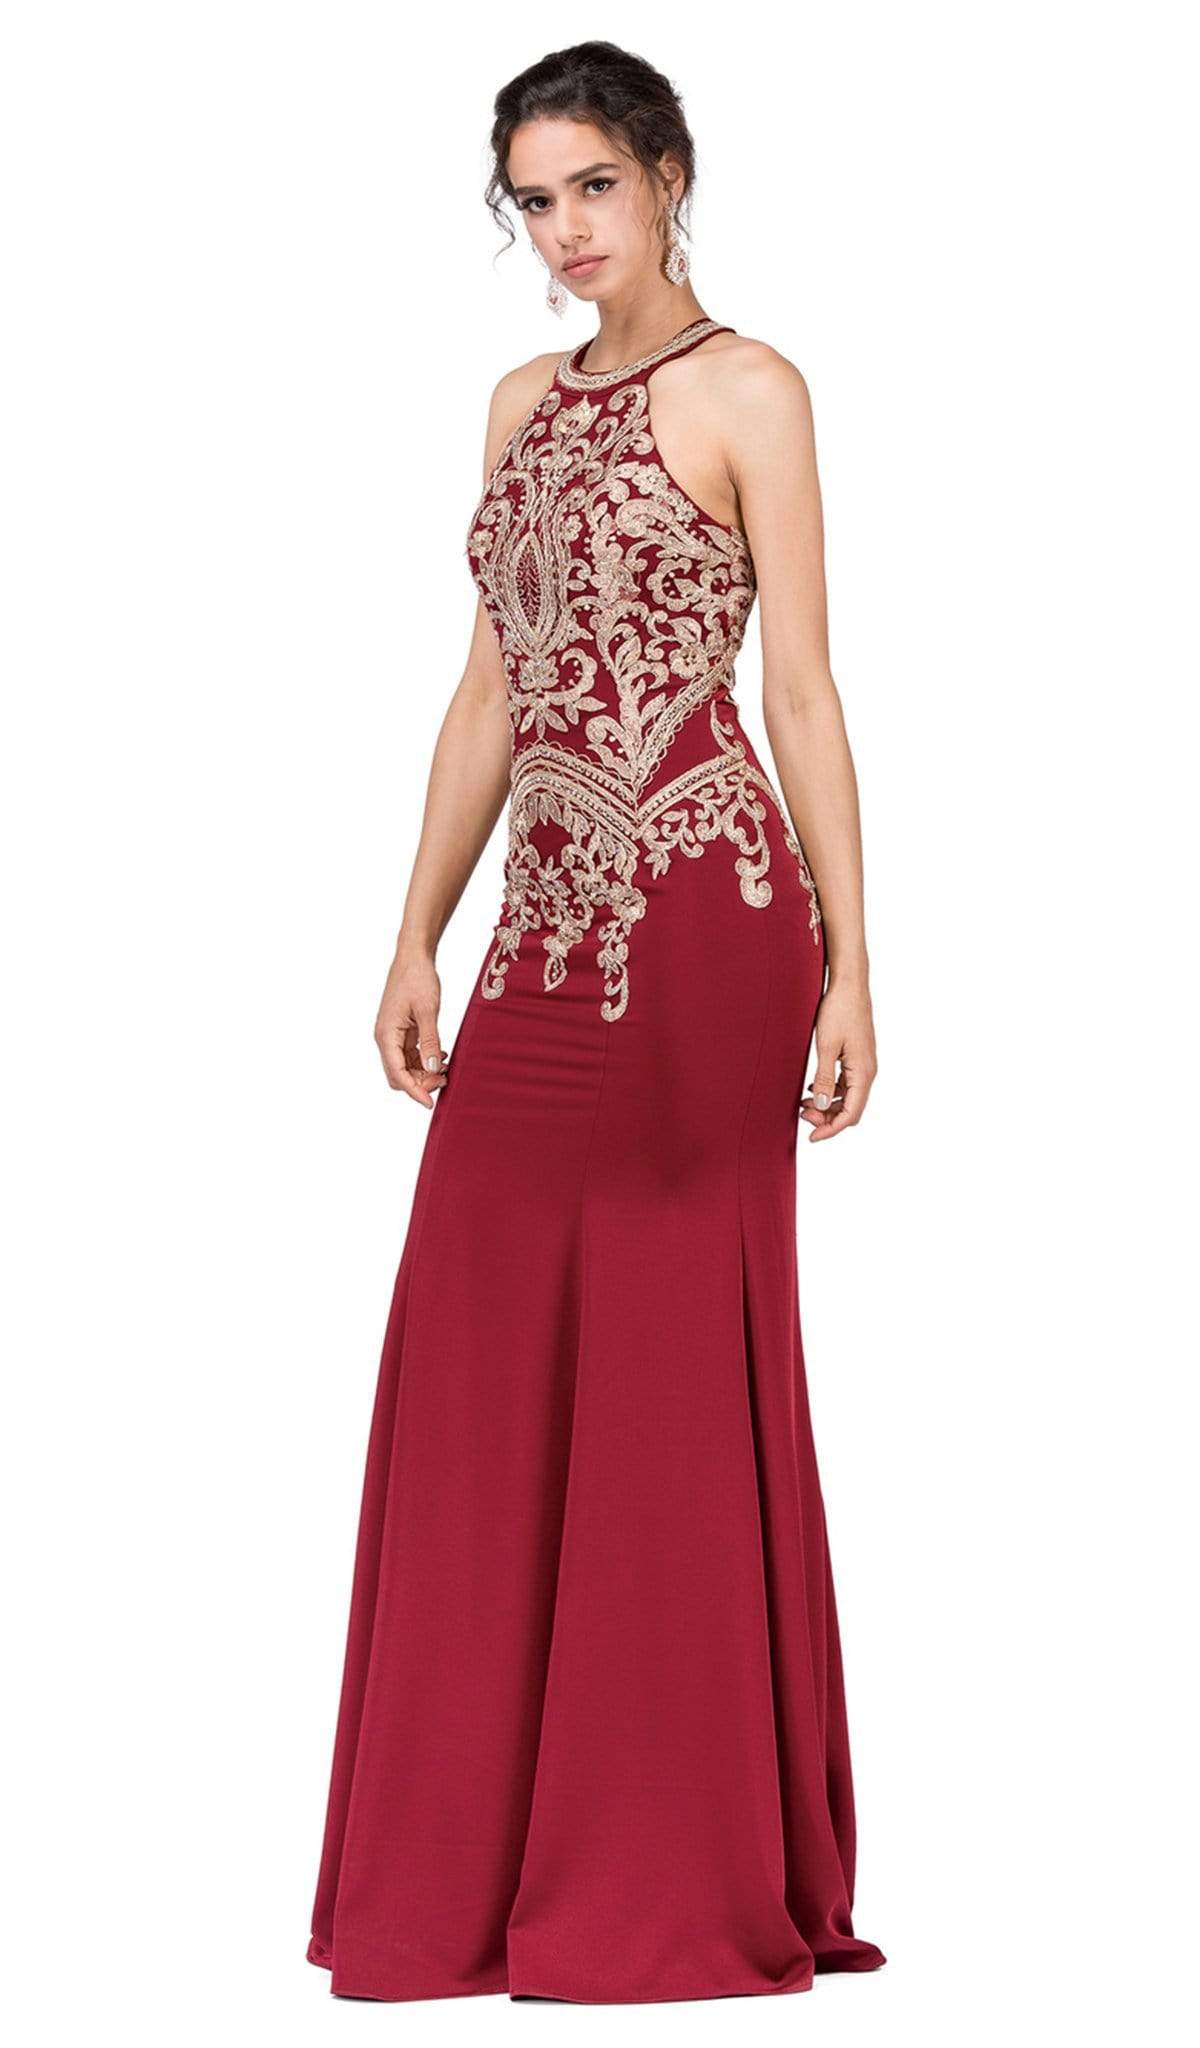 Aso Ebi Mermaid Prom Dresses Burgundy Gold Appliques Sheer Long Sleeves  Evening Gowns Sexy Side Split Sweep Train Party Dress - Prom Dresses -  AliExpress